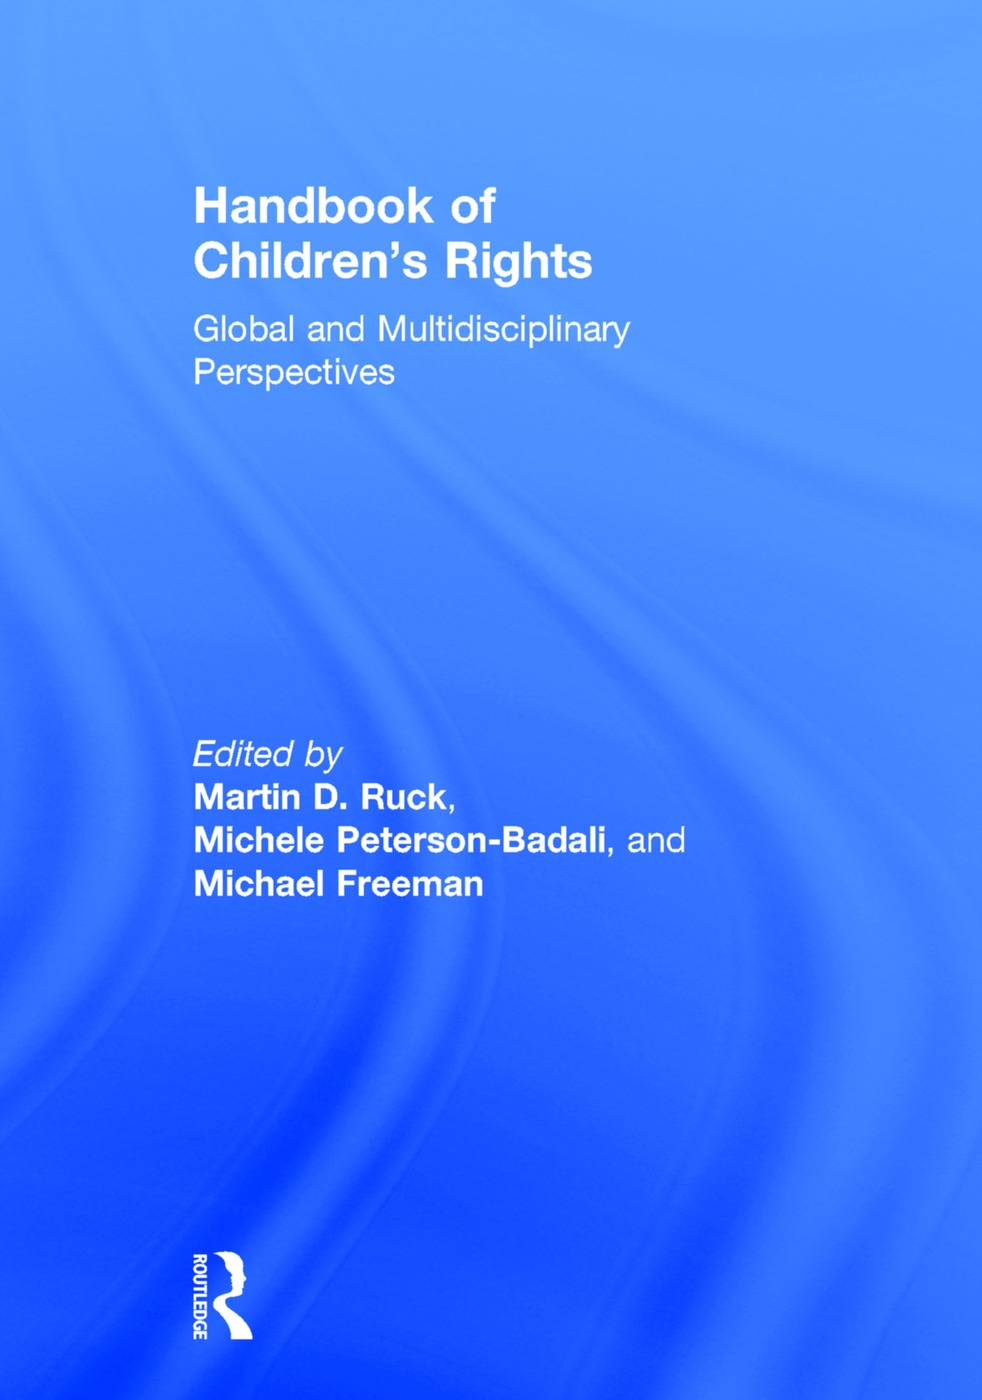 Handbook of Children’s Rights: Global and Multidisciplinary Perspectives